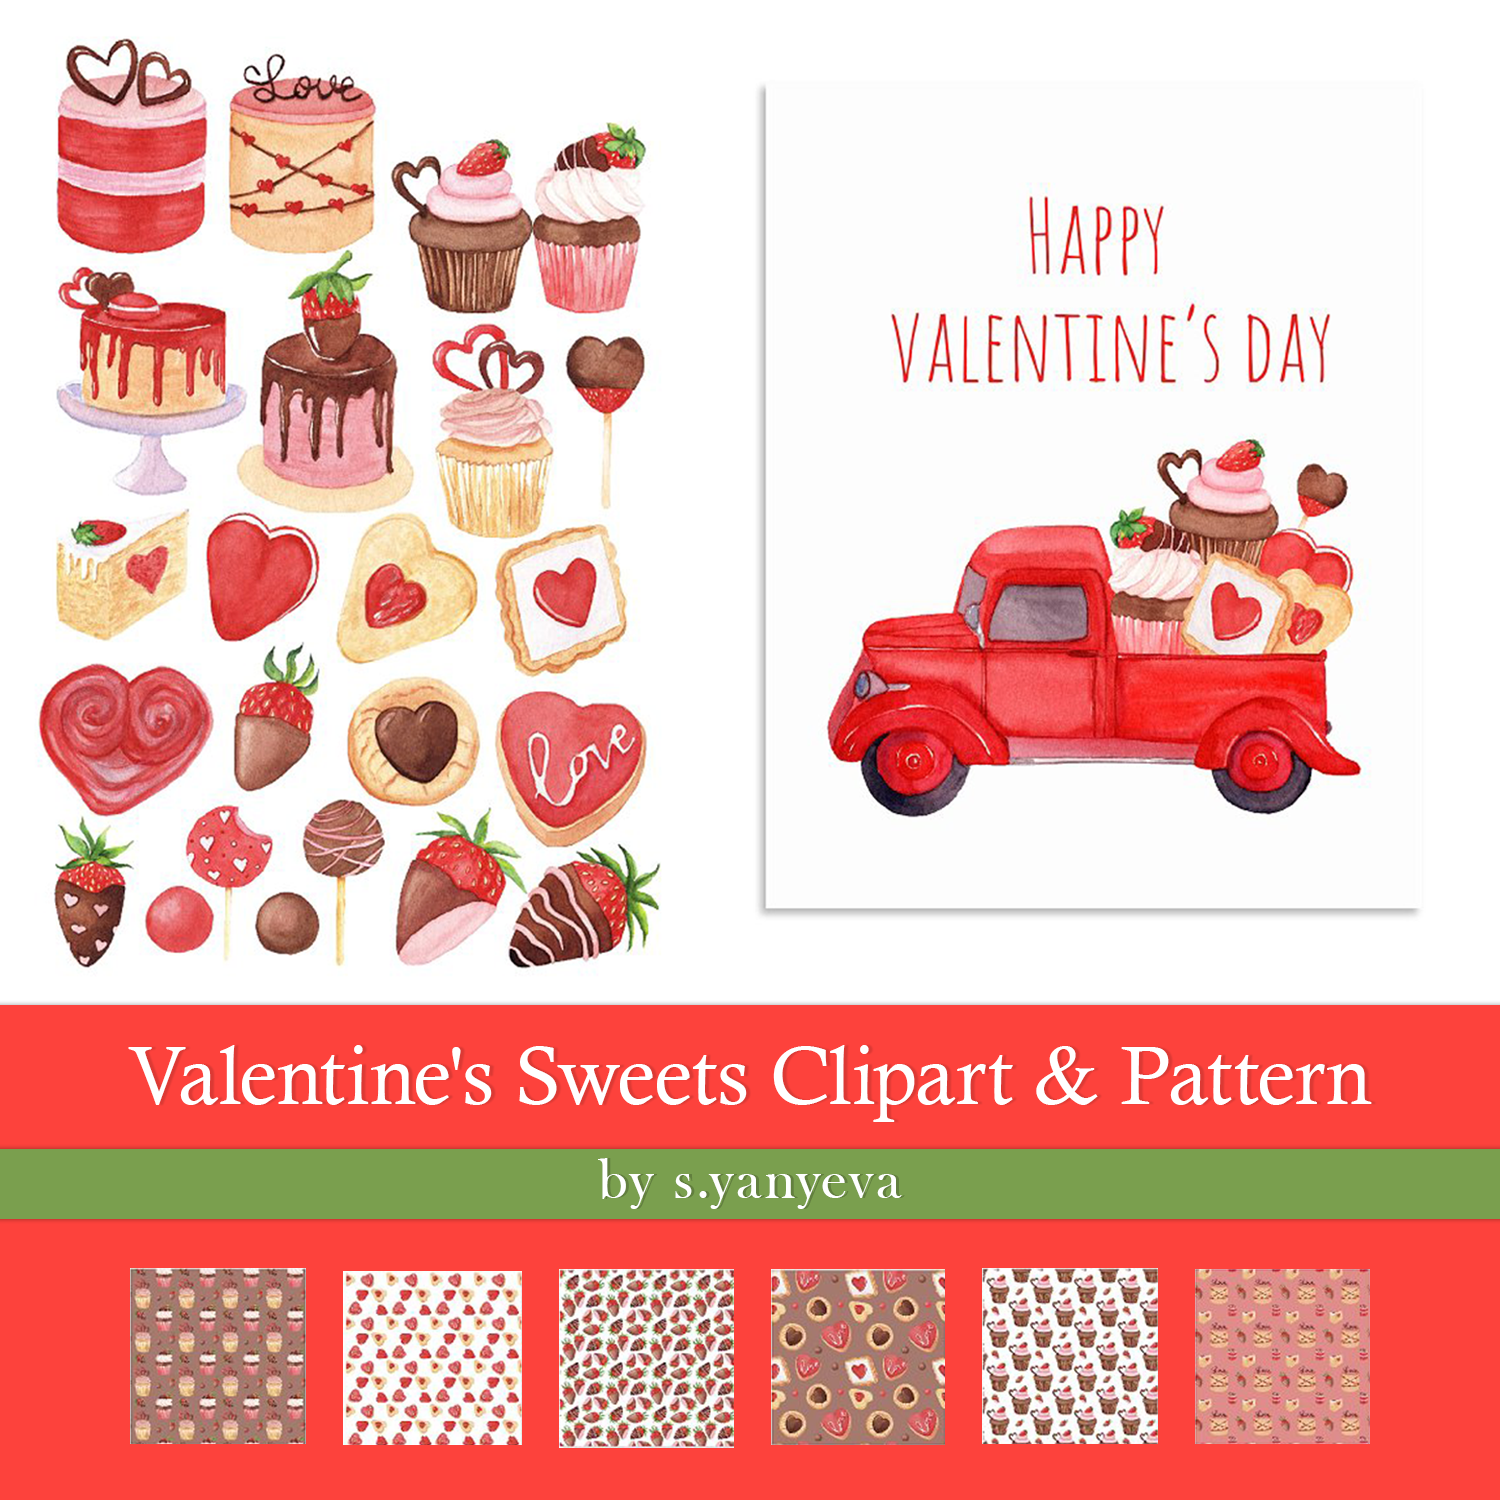 Valentines sweets clipart pattern preview.